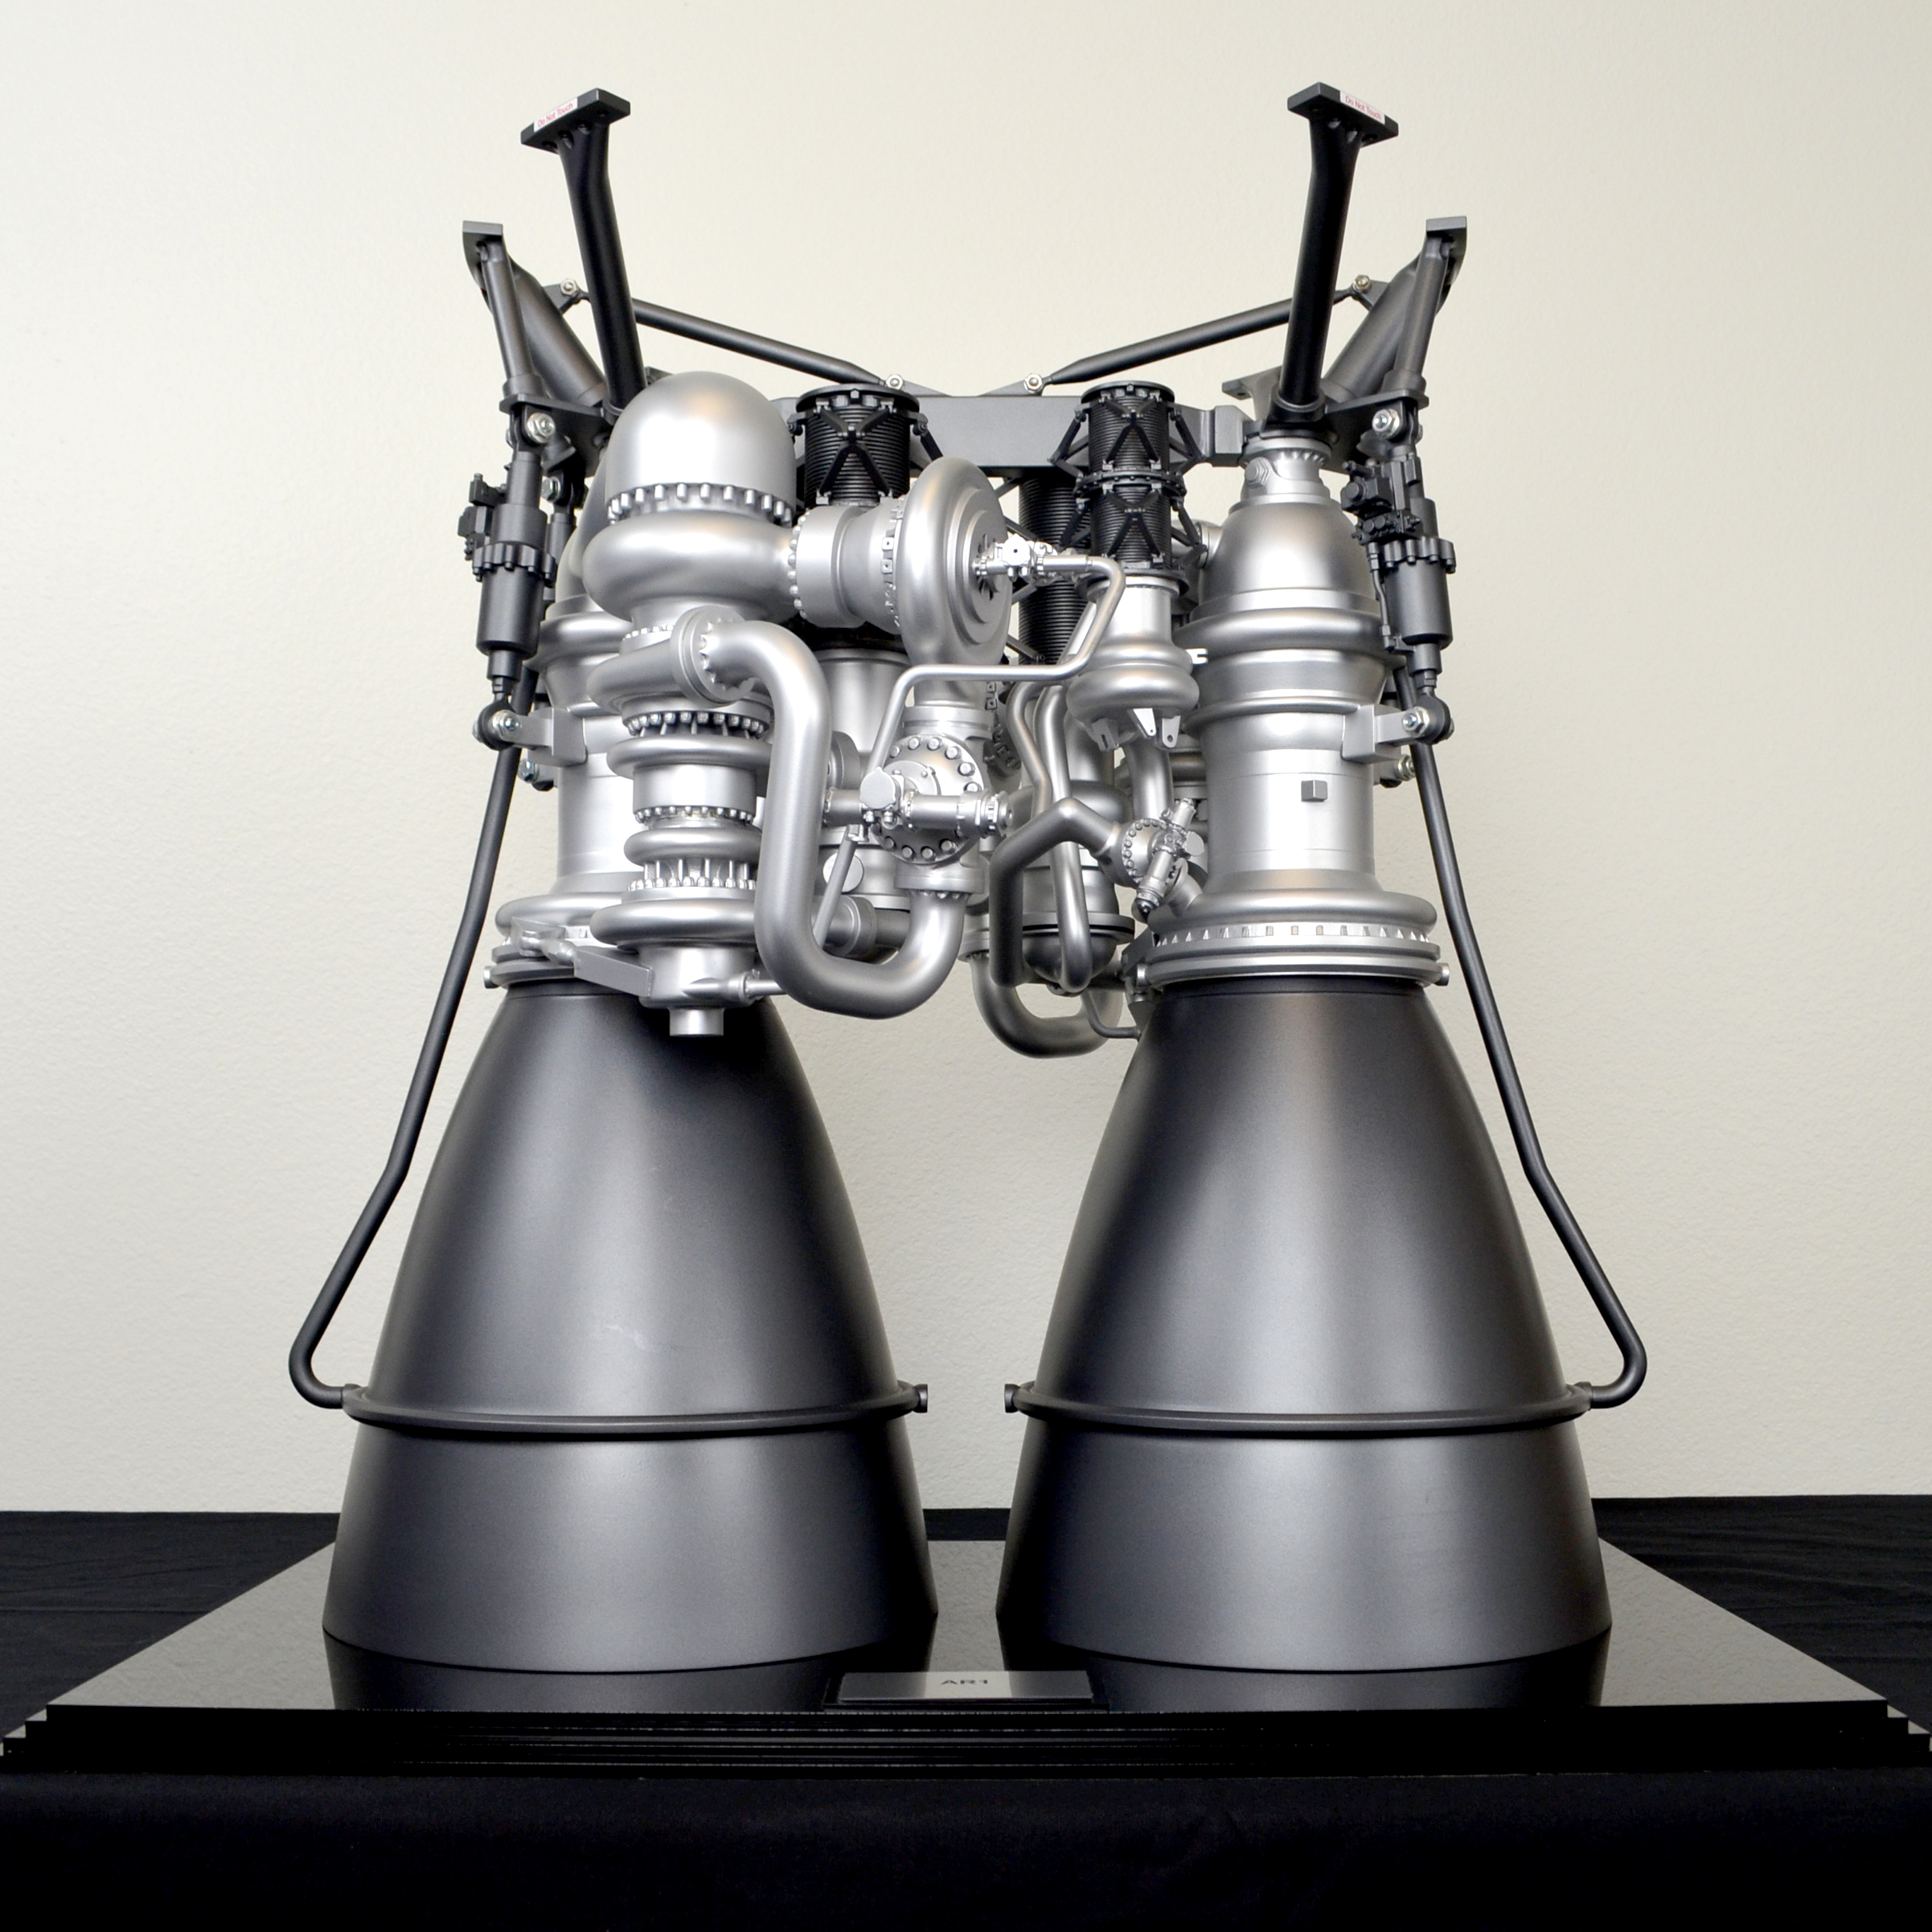 6th-Scale-AR1-Dual-Chamber Rocket Engine Model